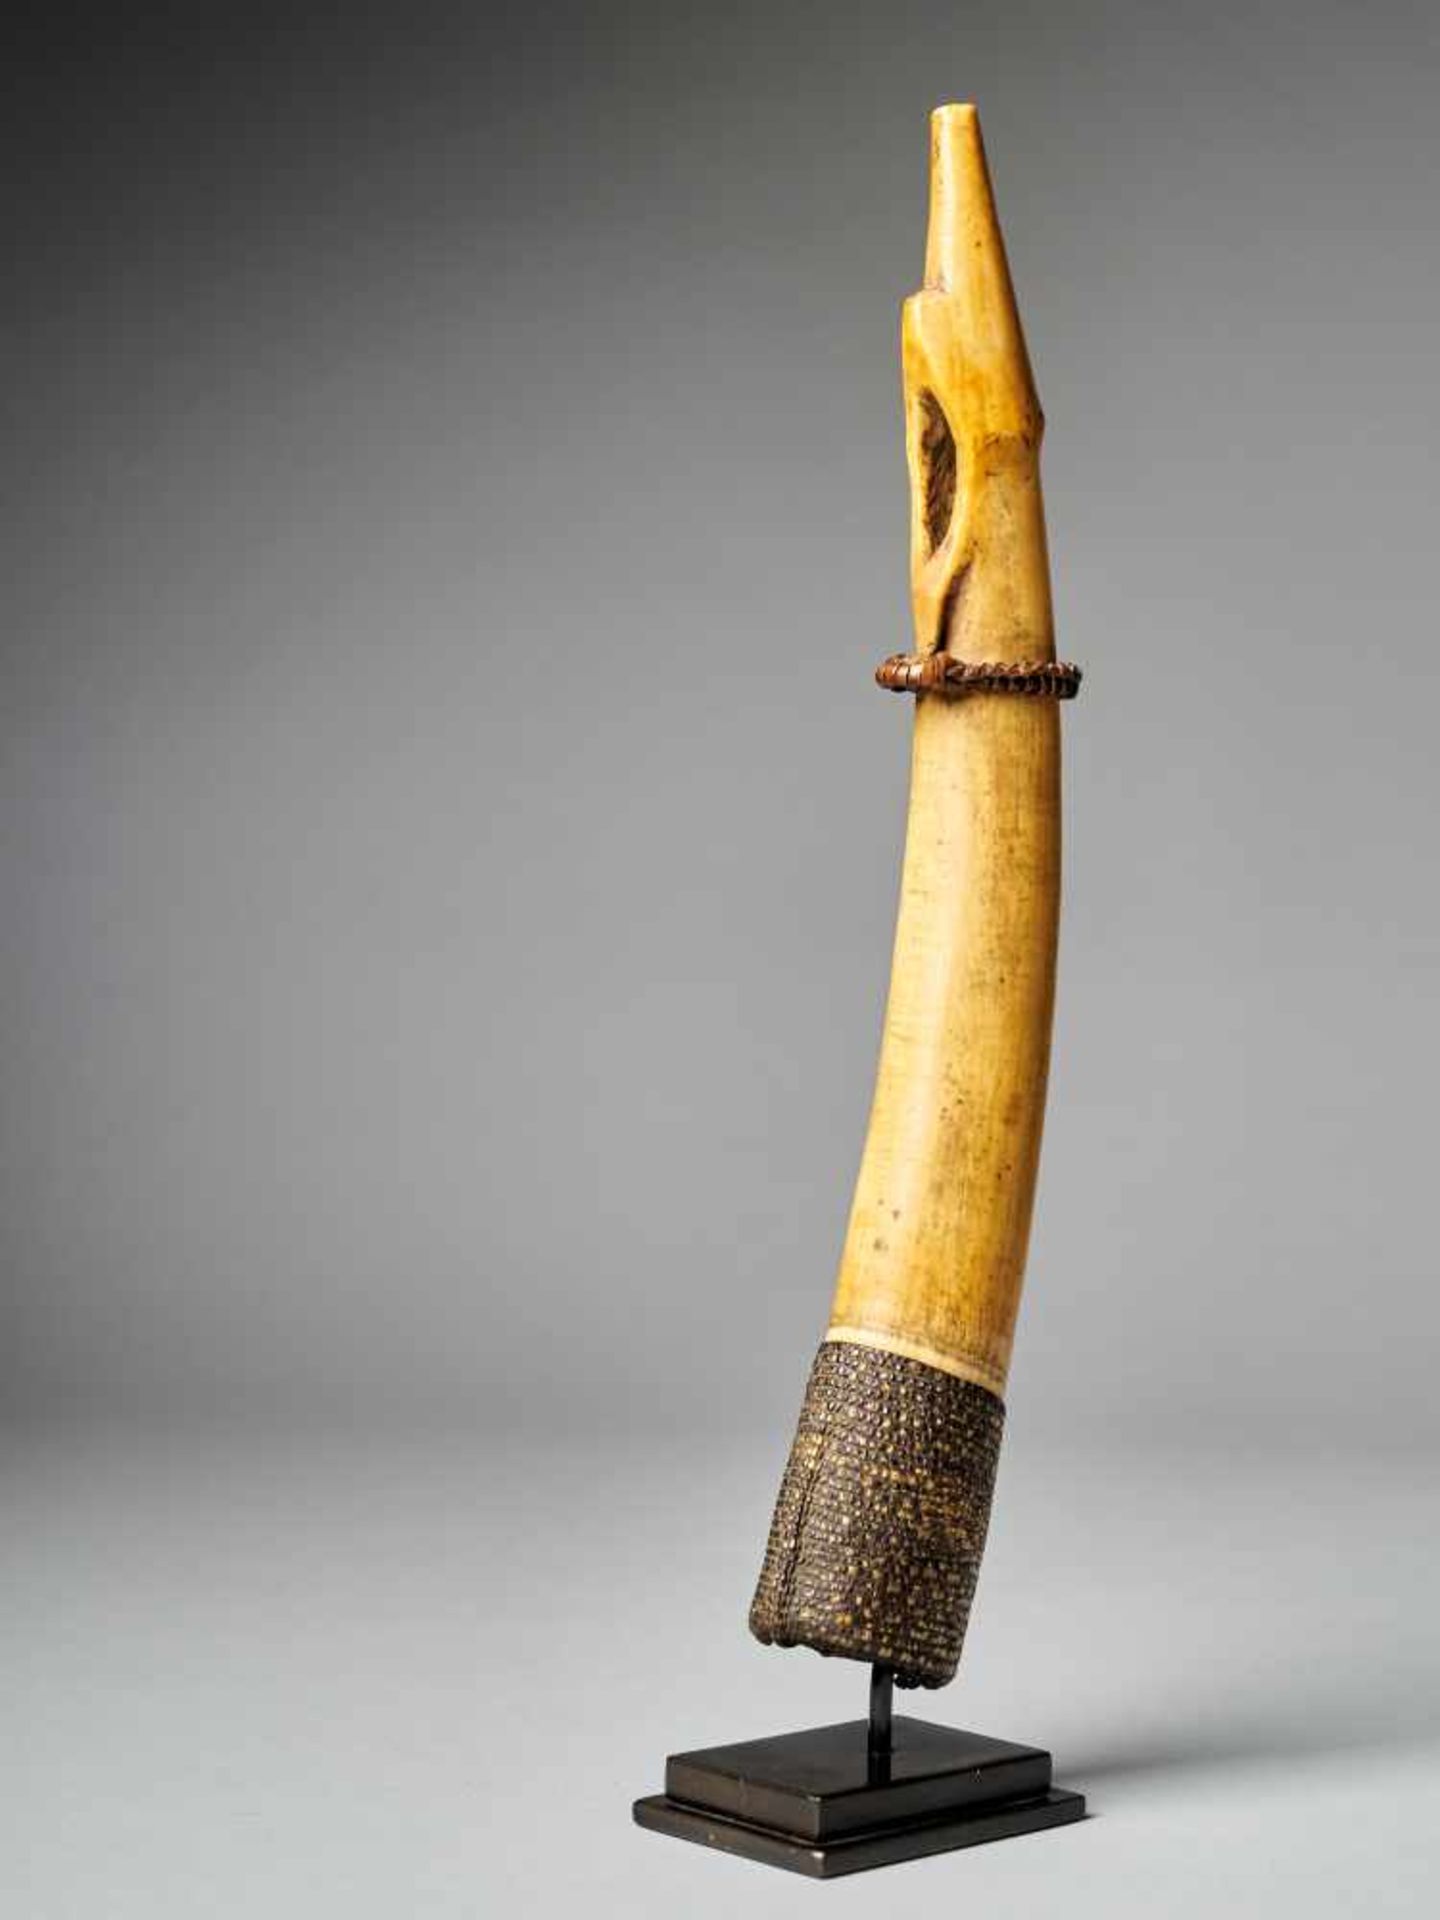 Side-Blown Horn - Bakongo People, DRC - Tribal ArtSide-Blown Horn with Leather finish. Due to